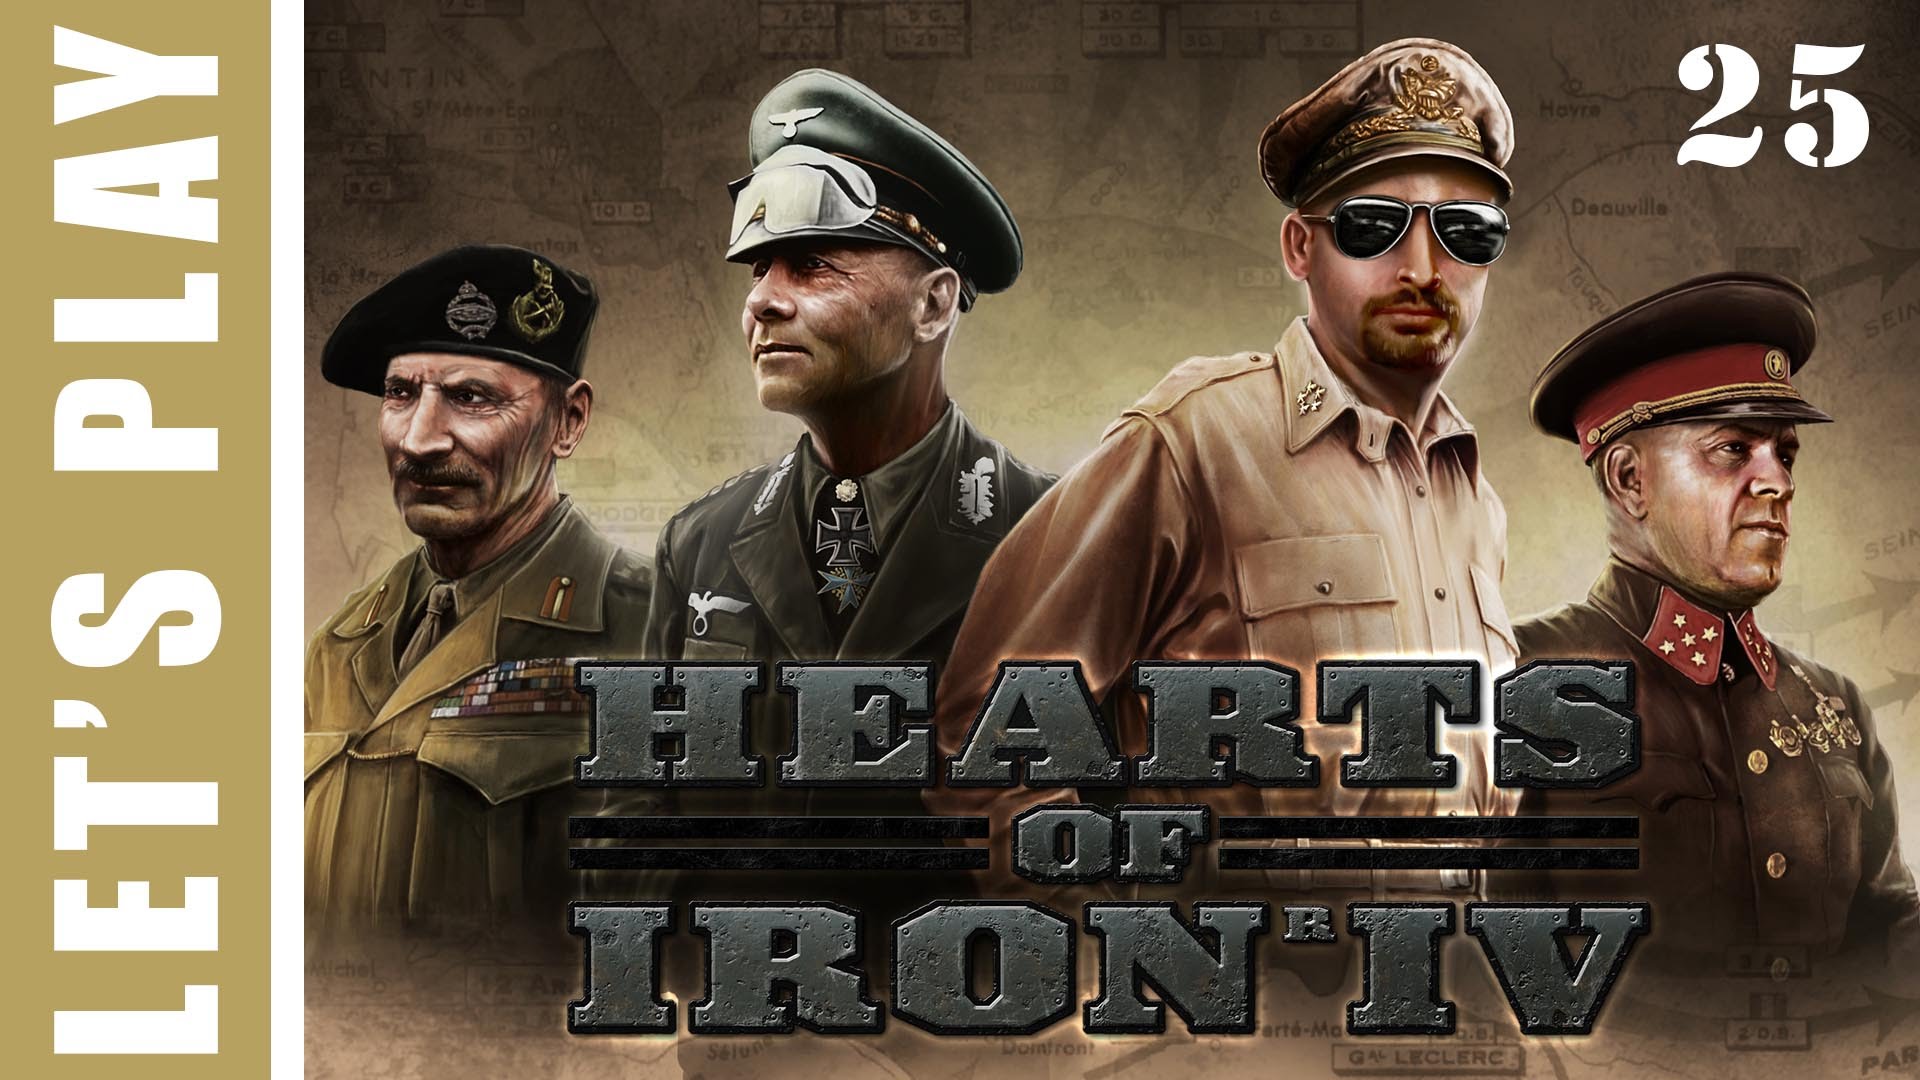 Hearts of Iron IV Germany Wins World War 2 Let’s Play 25